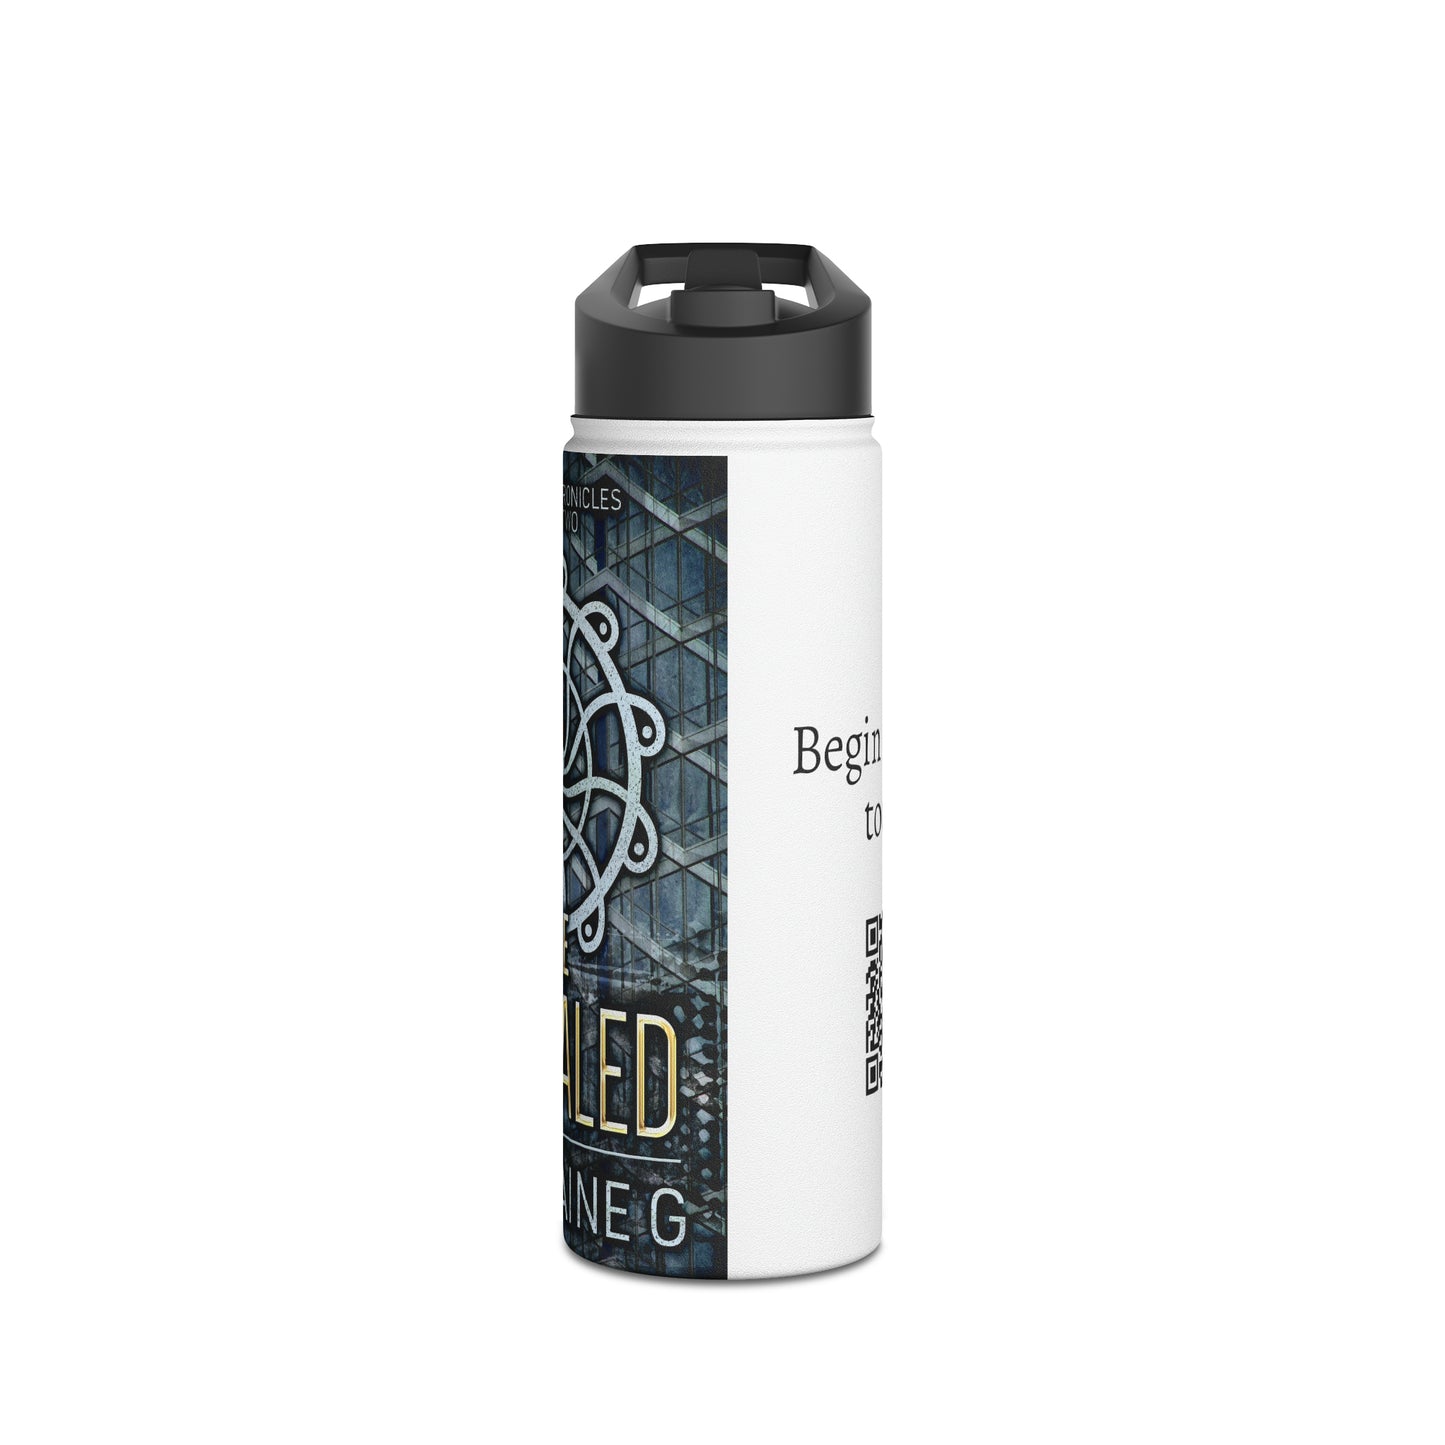 The Revealed - Stainless Steel Water Bottle